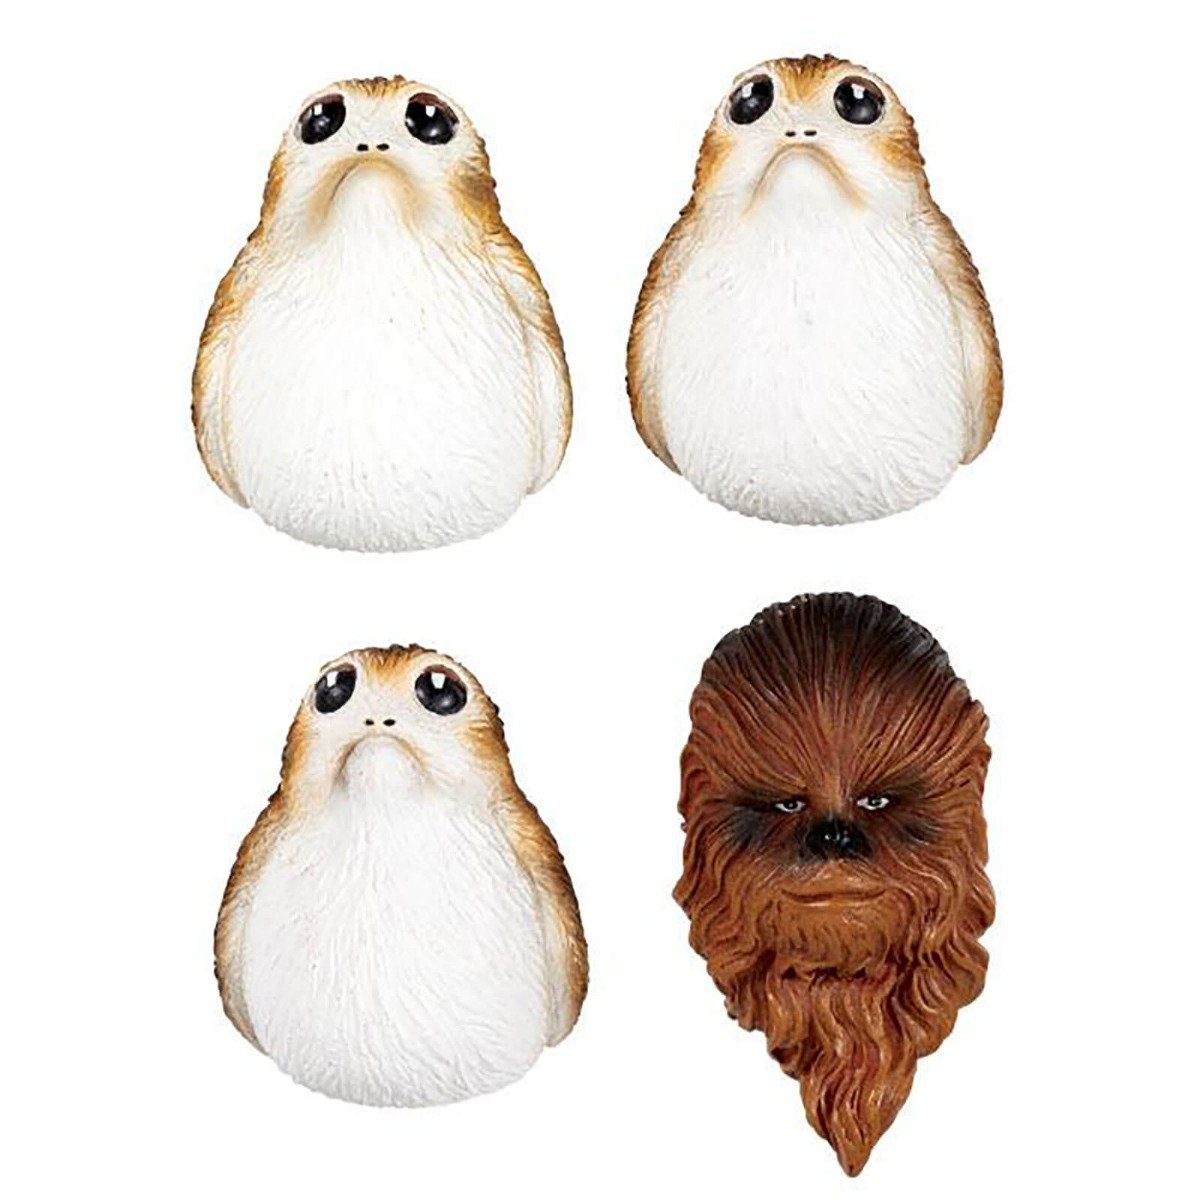 Star Wars Fridge Magnets Chewbacca and Porgs - Pop Figures